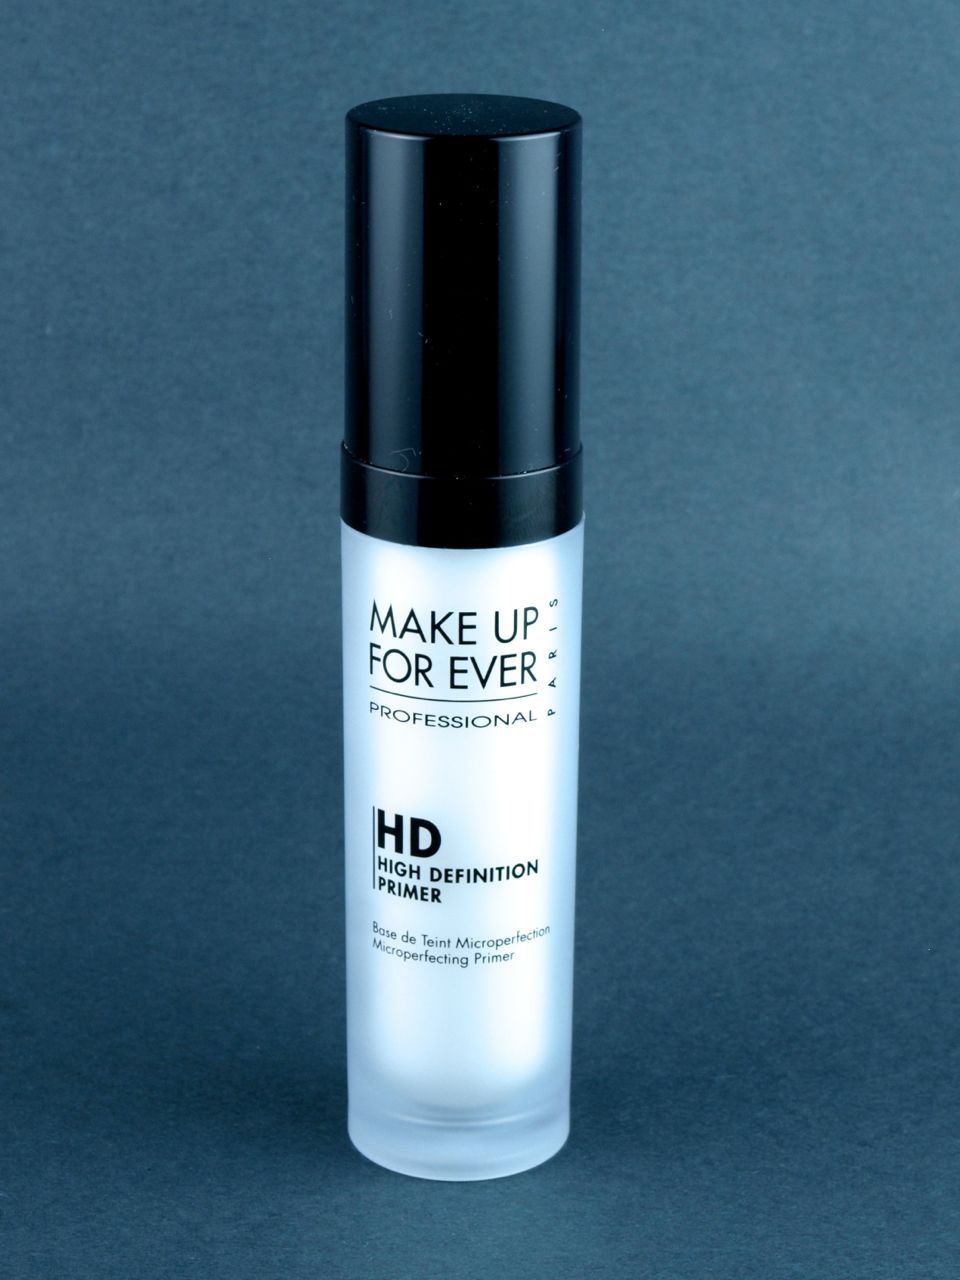 Makeup forever hd high definition foundation